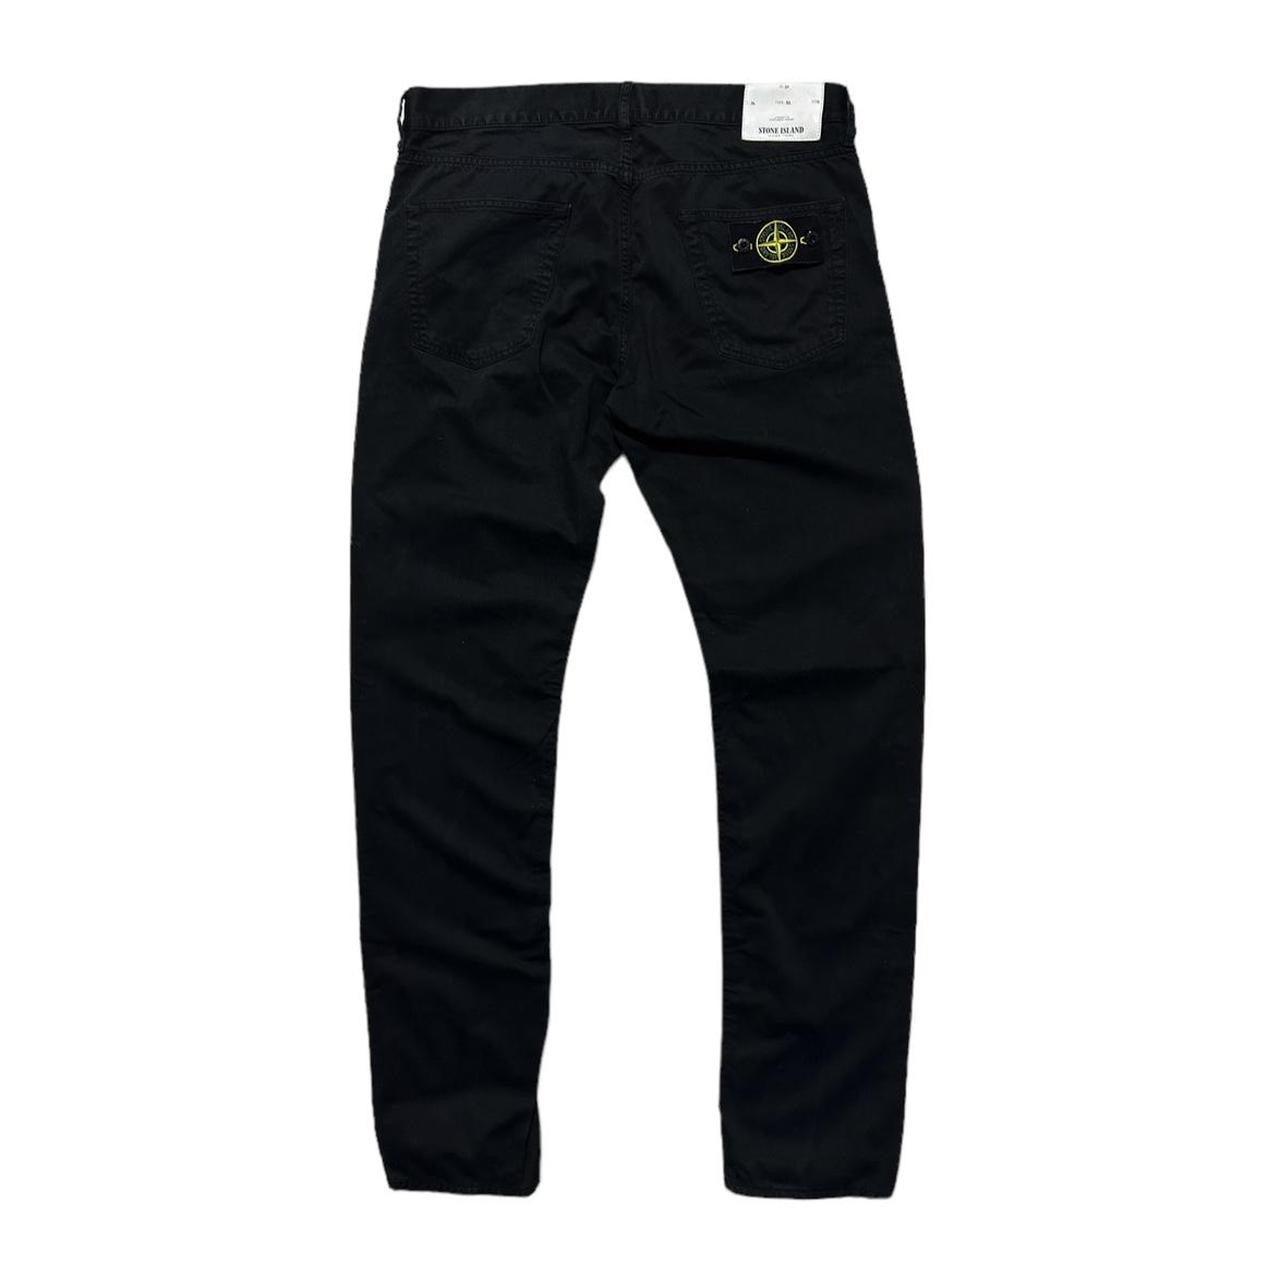 Stone Island Black Trousers - Known Source